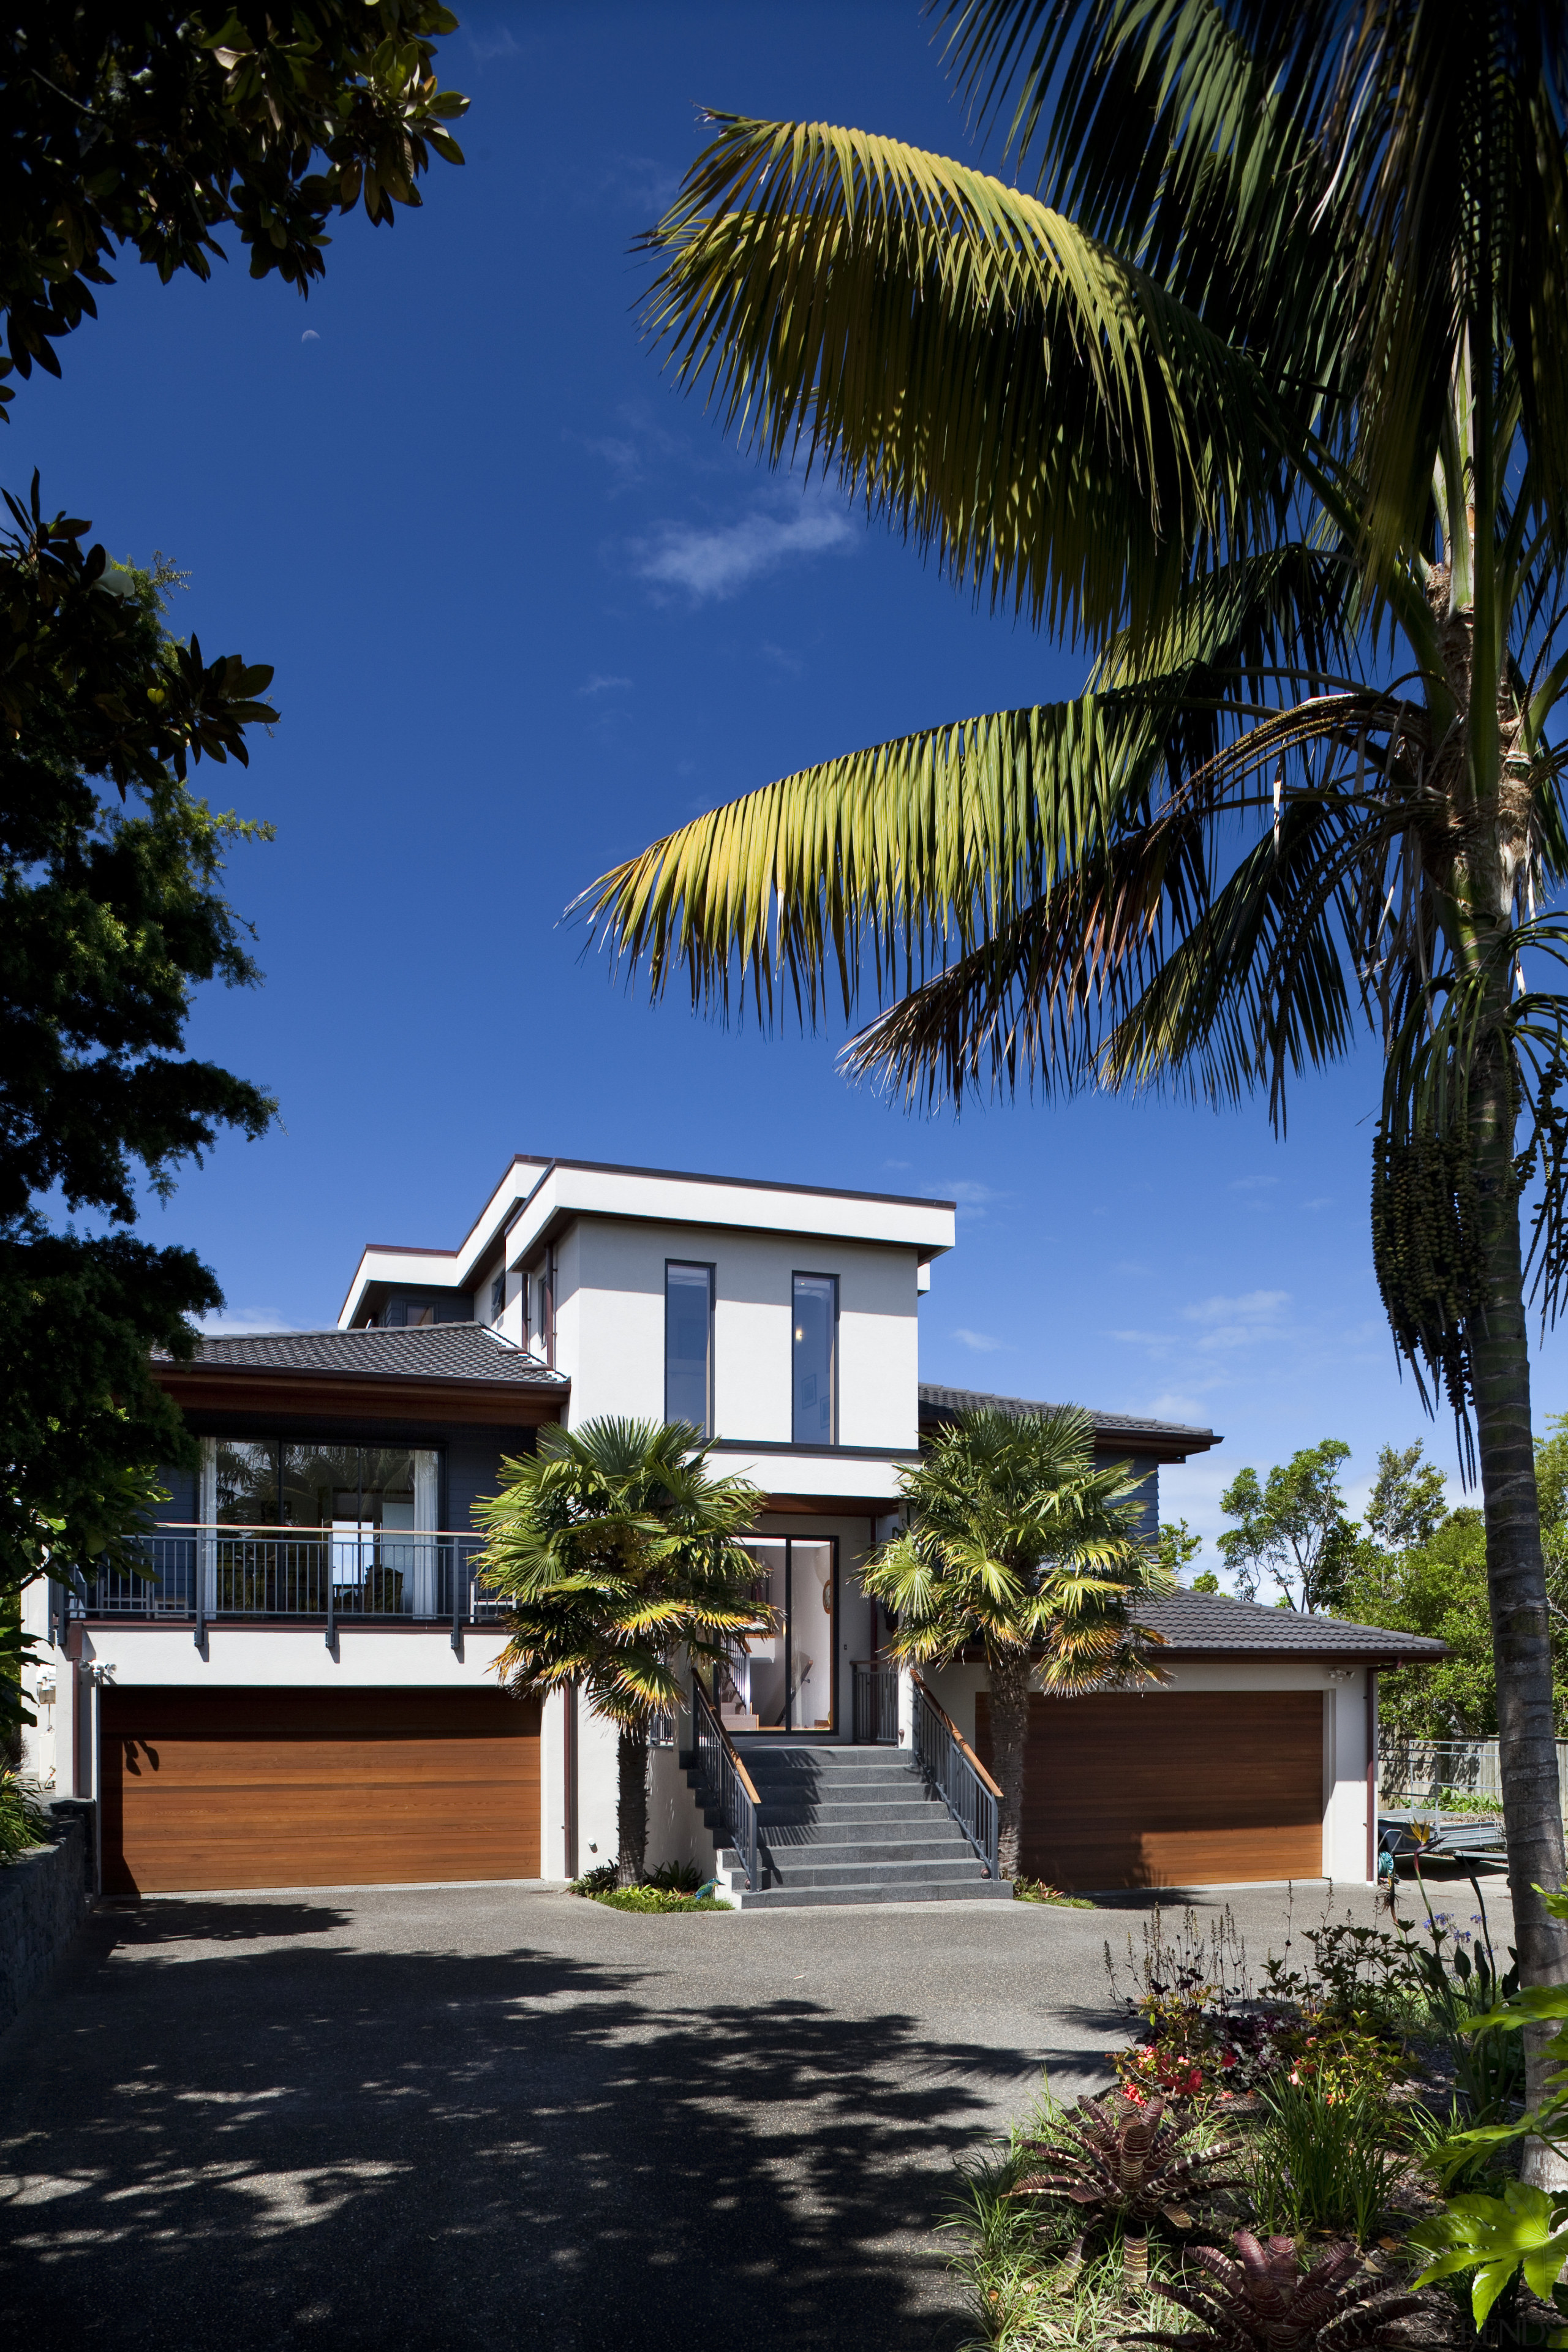 This home was designed and built by Signature architecture, arecales, building, condominium, cottage, daytime, estate, facade, home, house, palm tree, plant, property, real estate, residential area, resort, sky, tree, tropics, villa, black